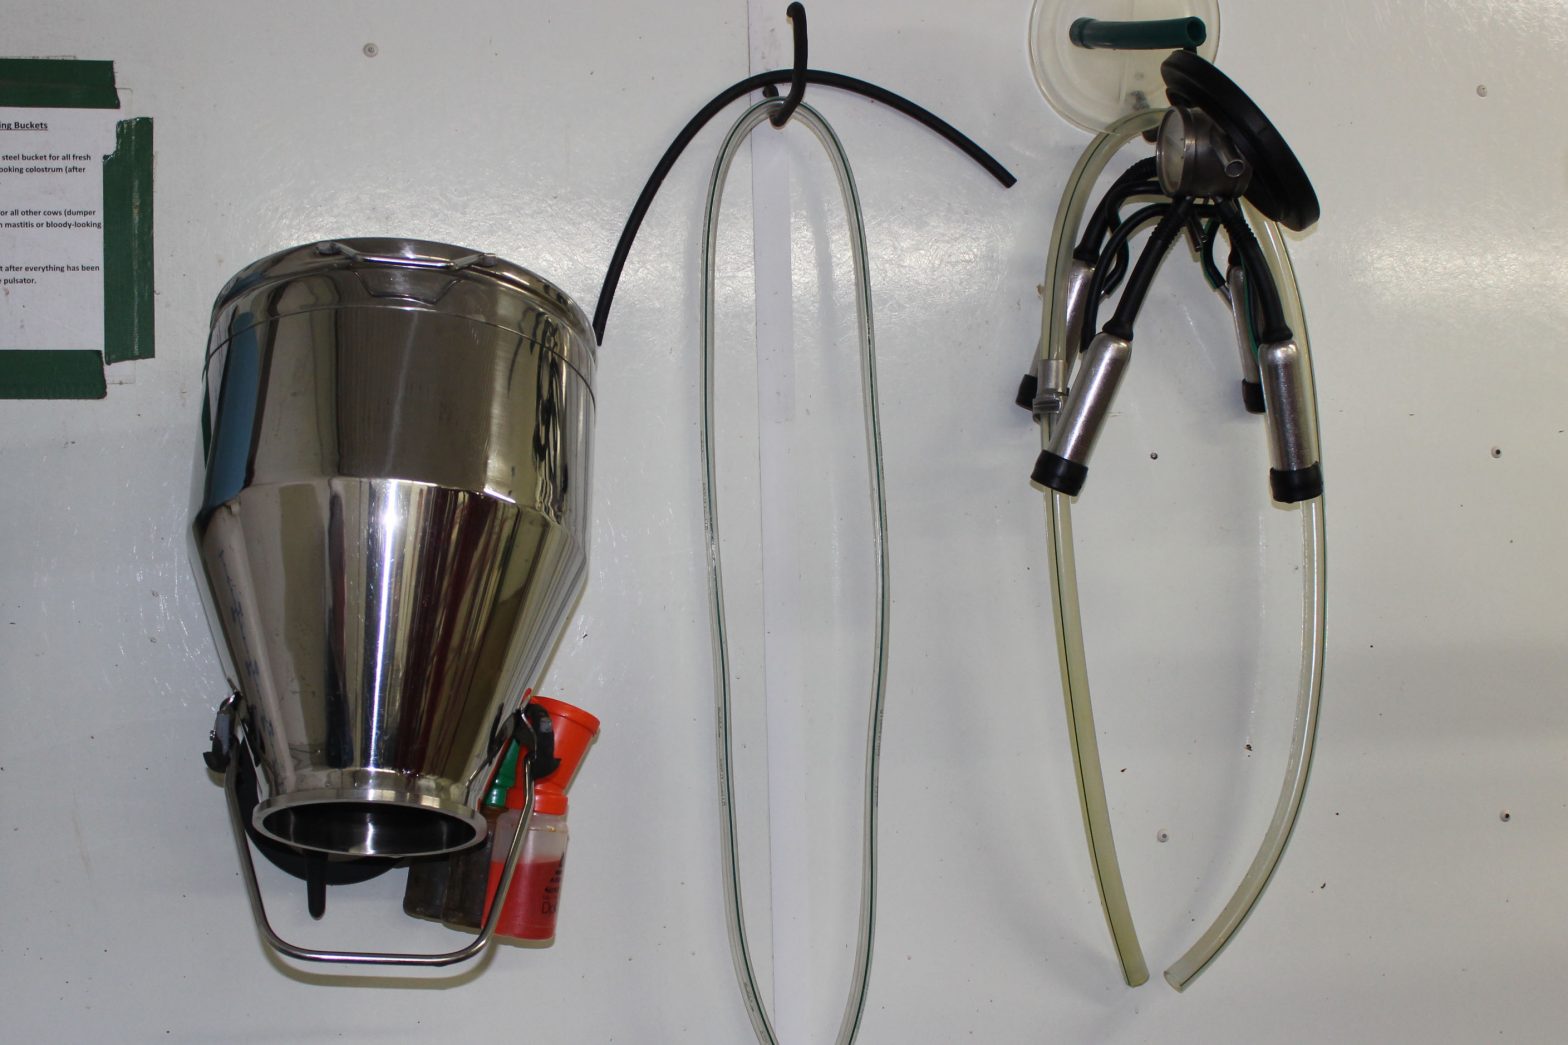 This stainless steel pail is used to harvest colostrum after calving.  It is sanitized between uses and the hoses and inflations are replaced monthly.  This helps keep the colostrum as clean and high quality as possible.